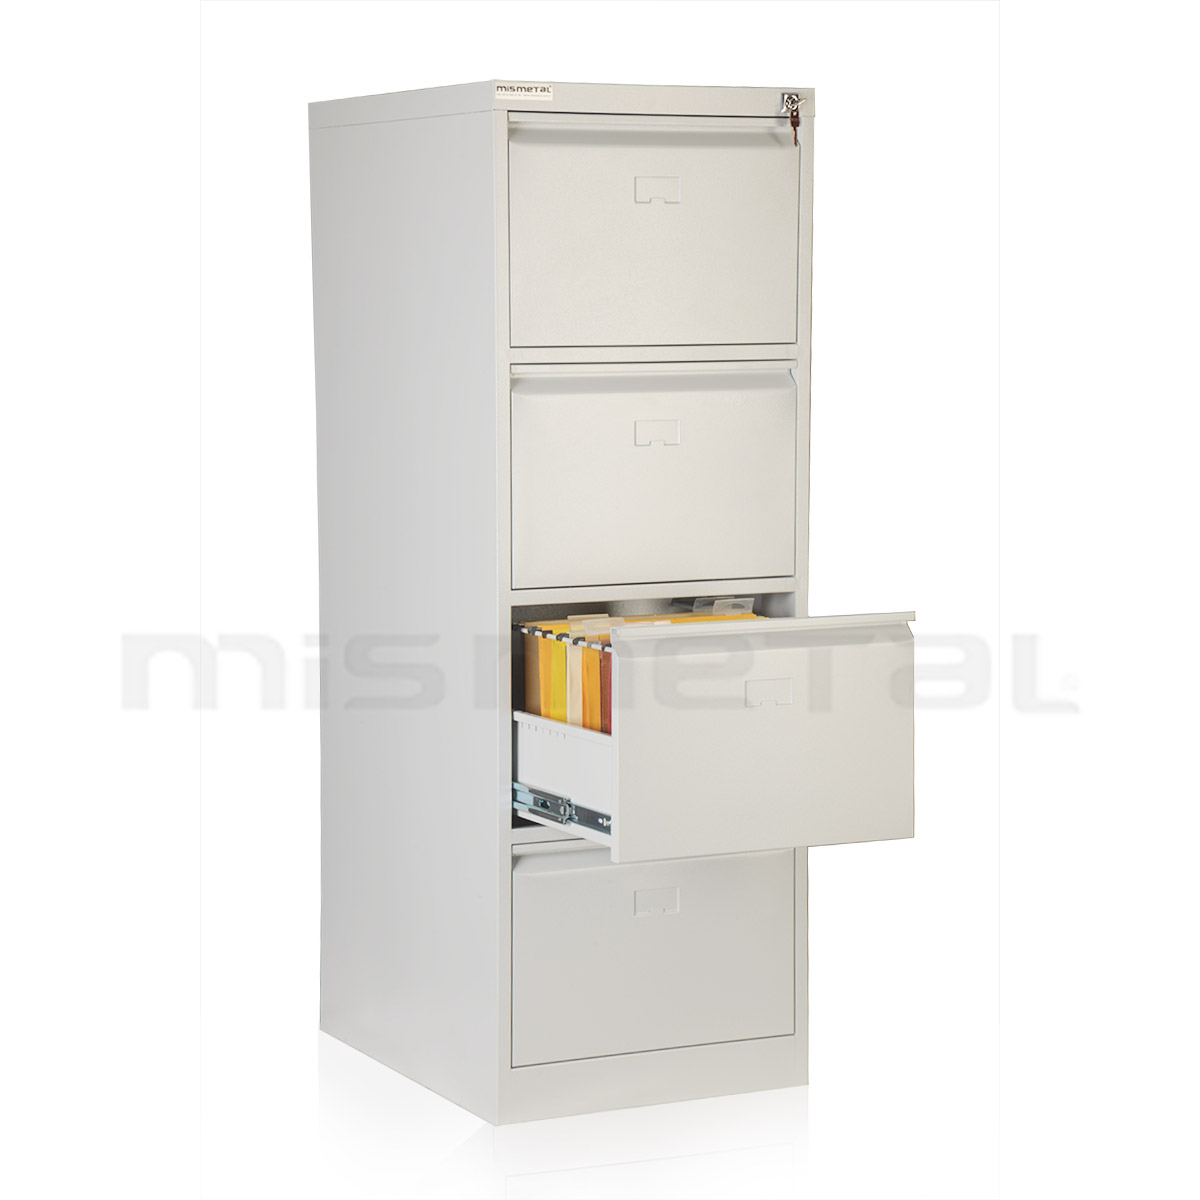 4 Drawers Telescopic Rail Card Index Cabinet